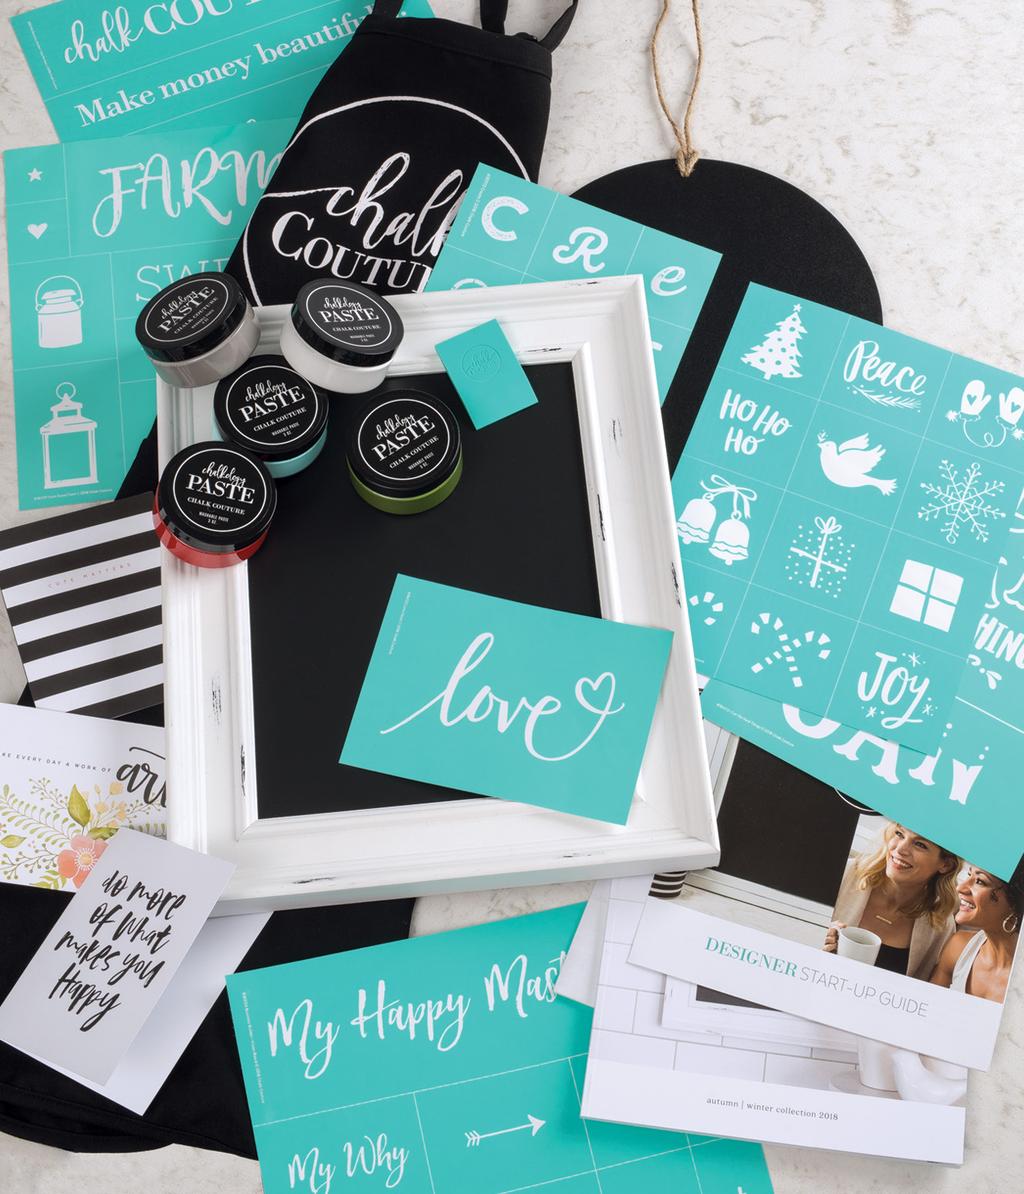 OVER $240 $99 starter kit RETAIL VALUE create something wonder-full Discover the wonder of the newest trend in home décor and discover your own financial and creative potential, too!